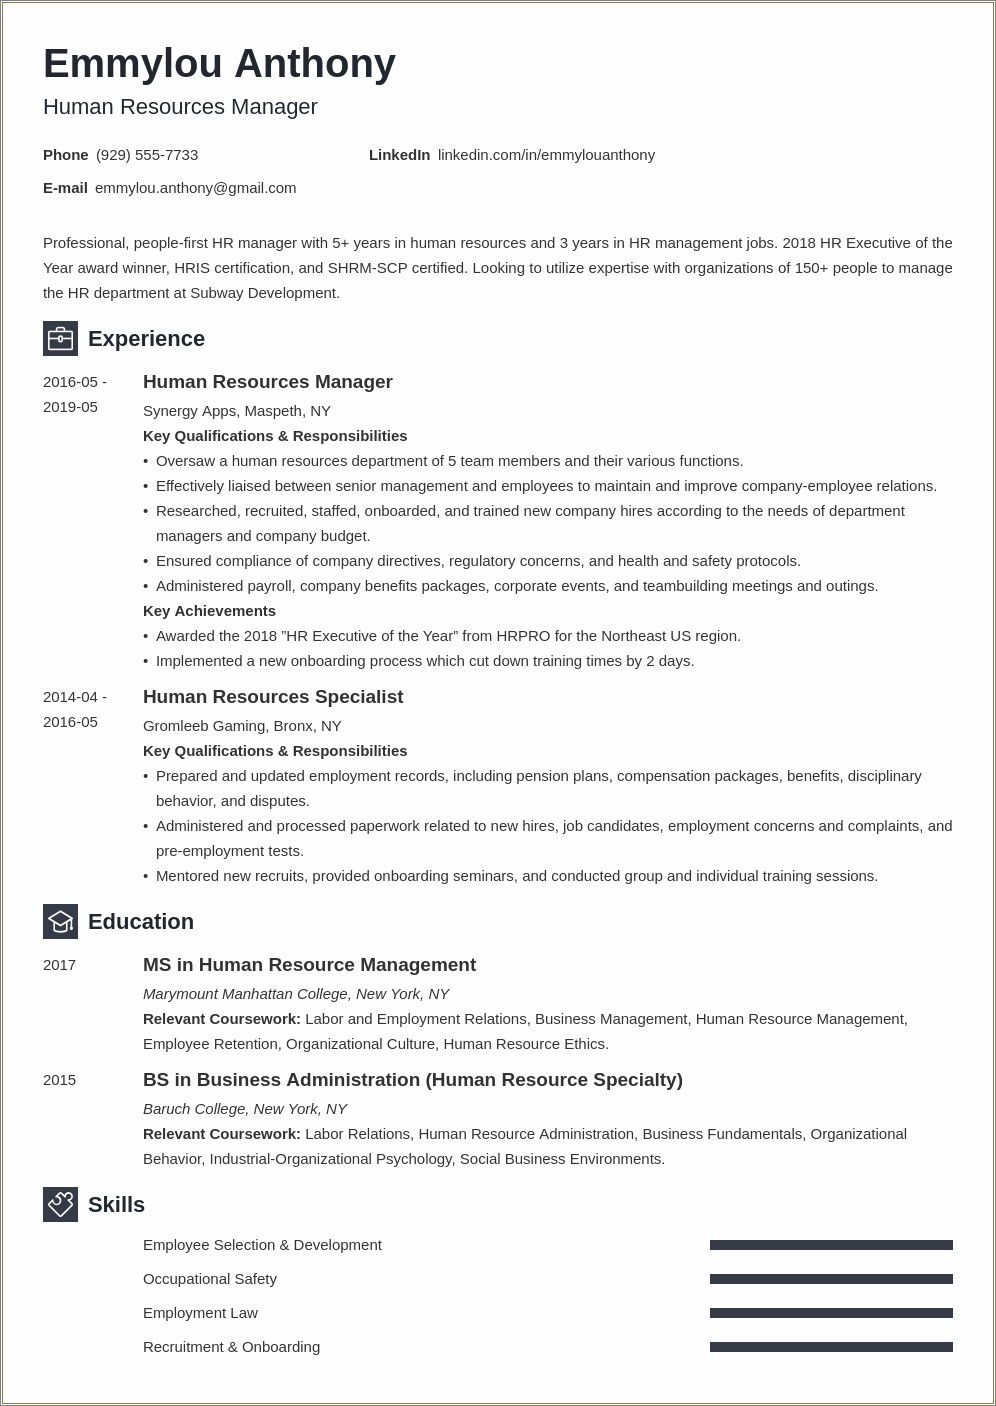 Resume Objective Statement For Human Resources